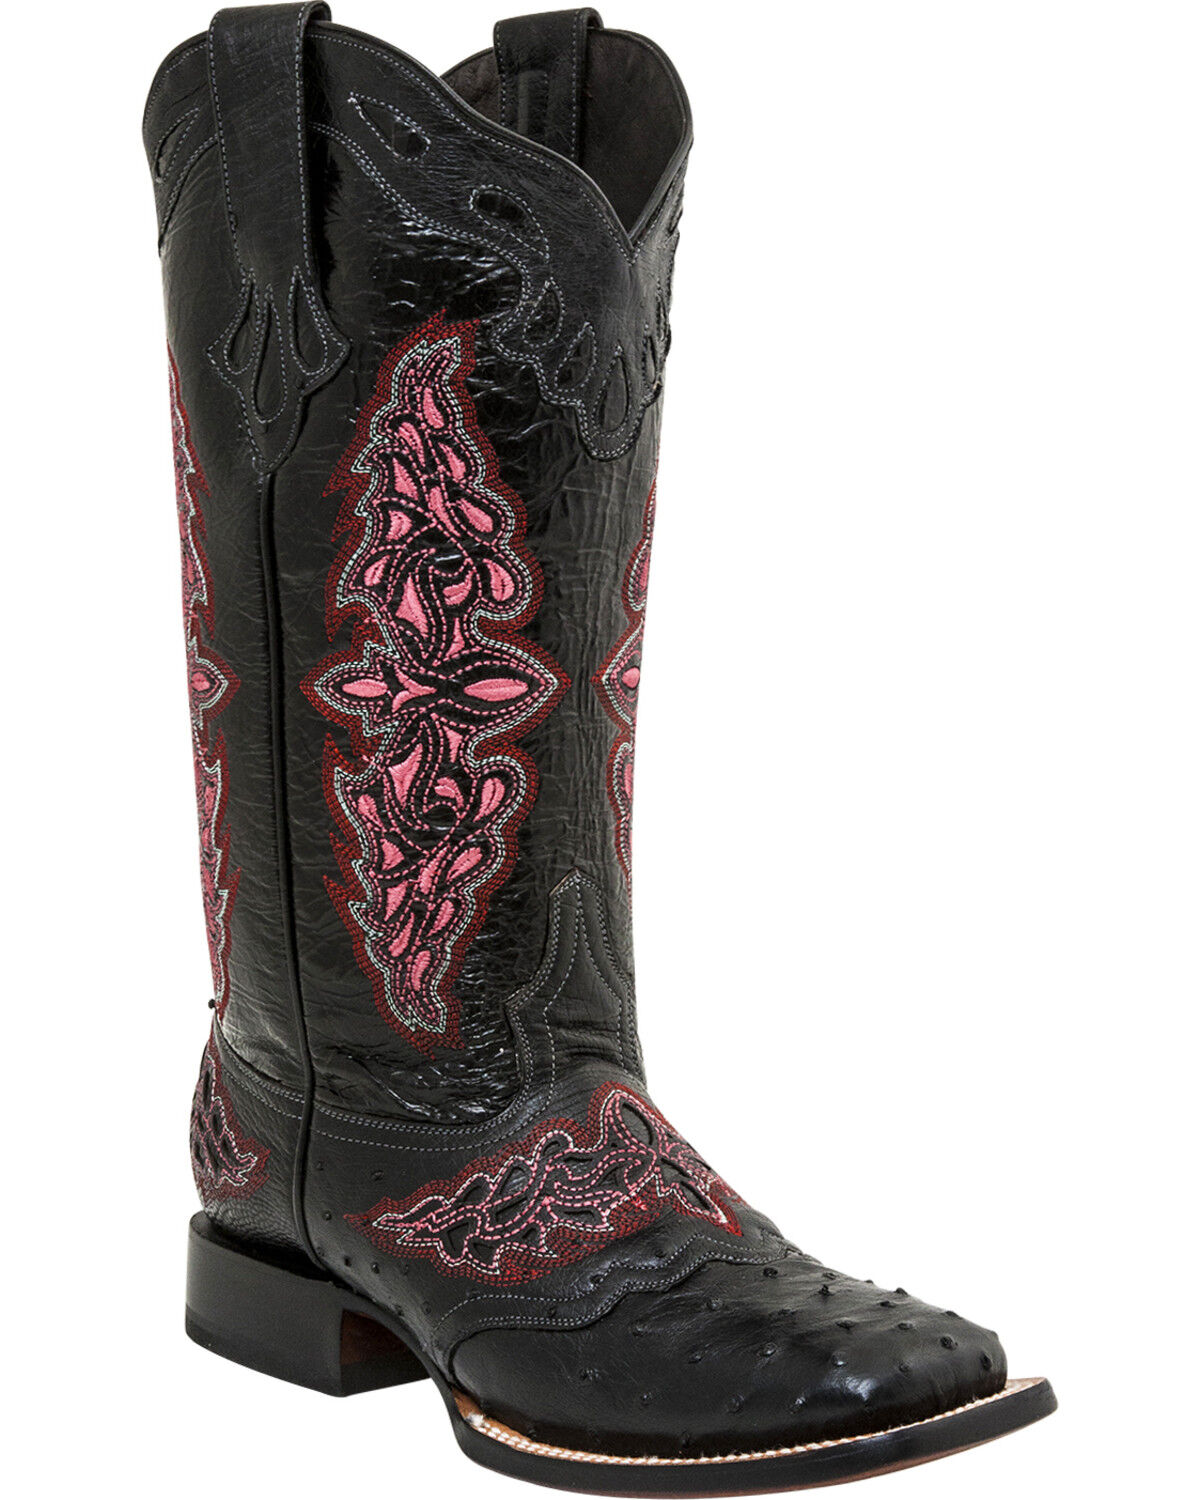 lucchese women's boots cavender's